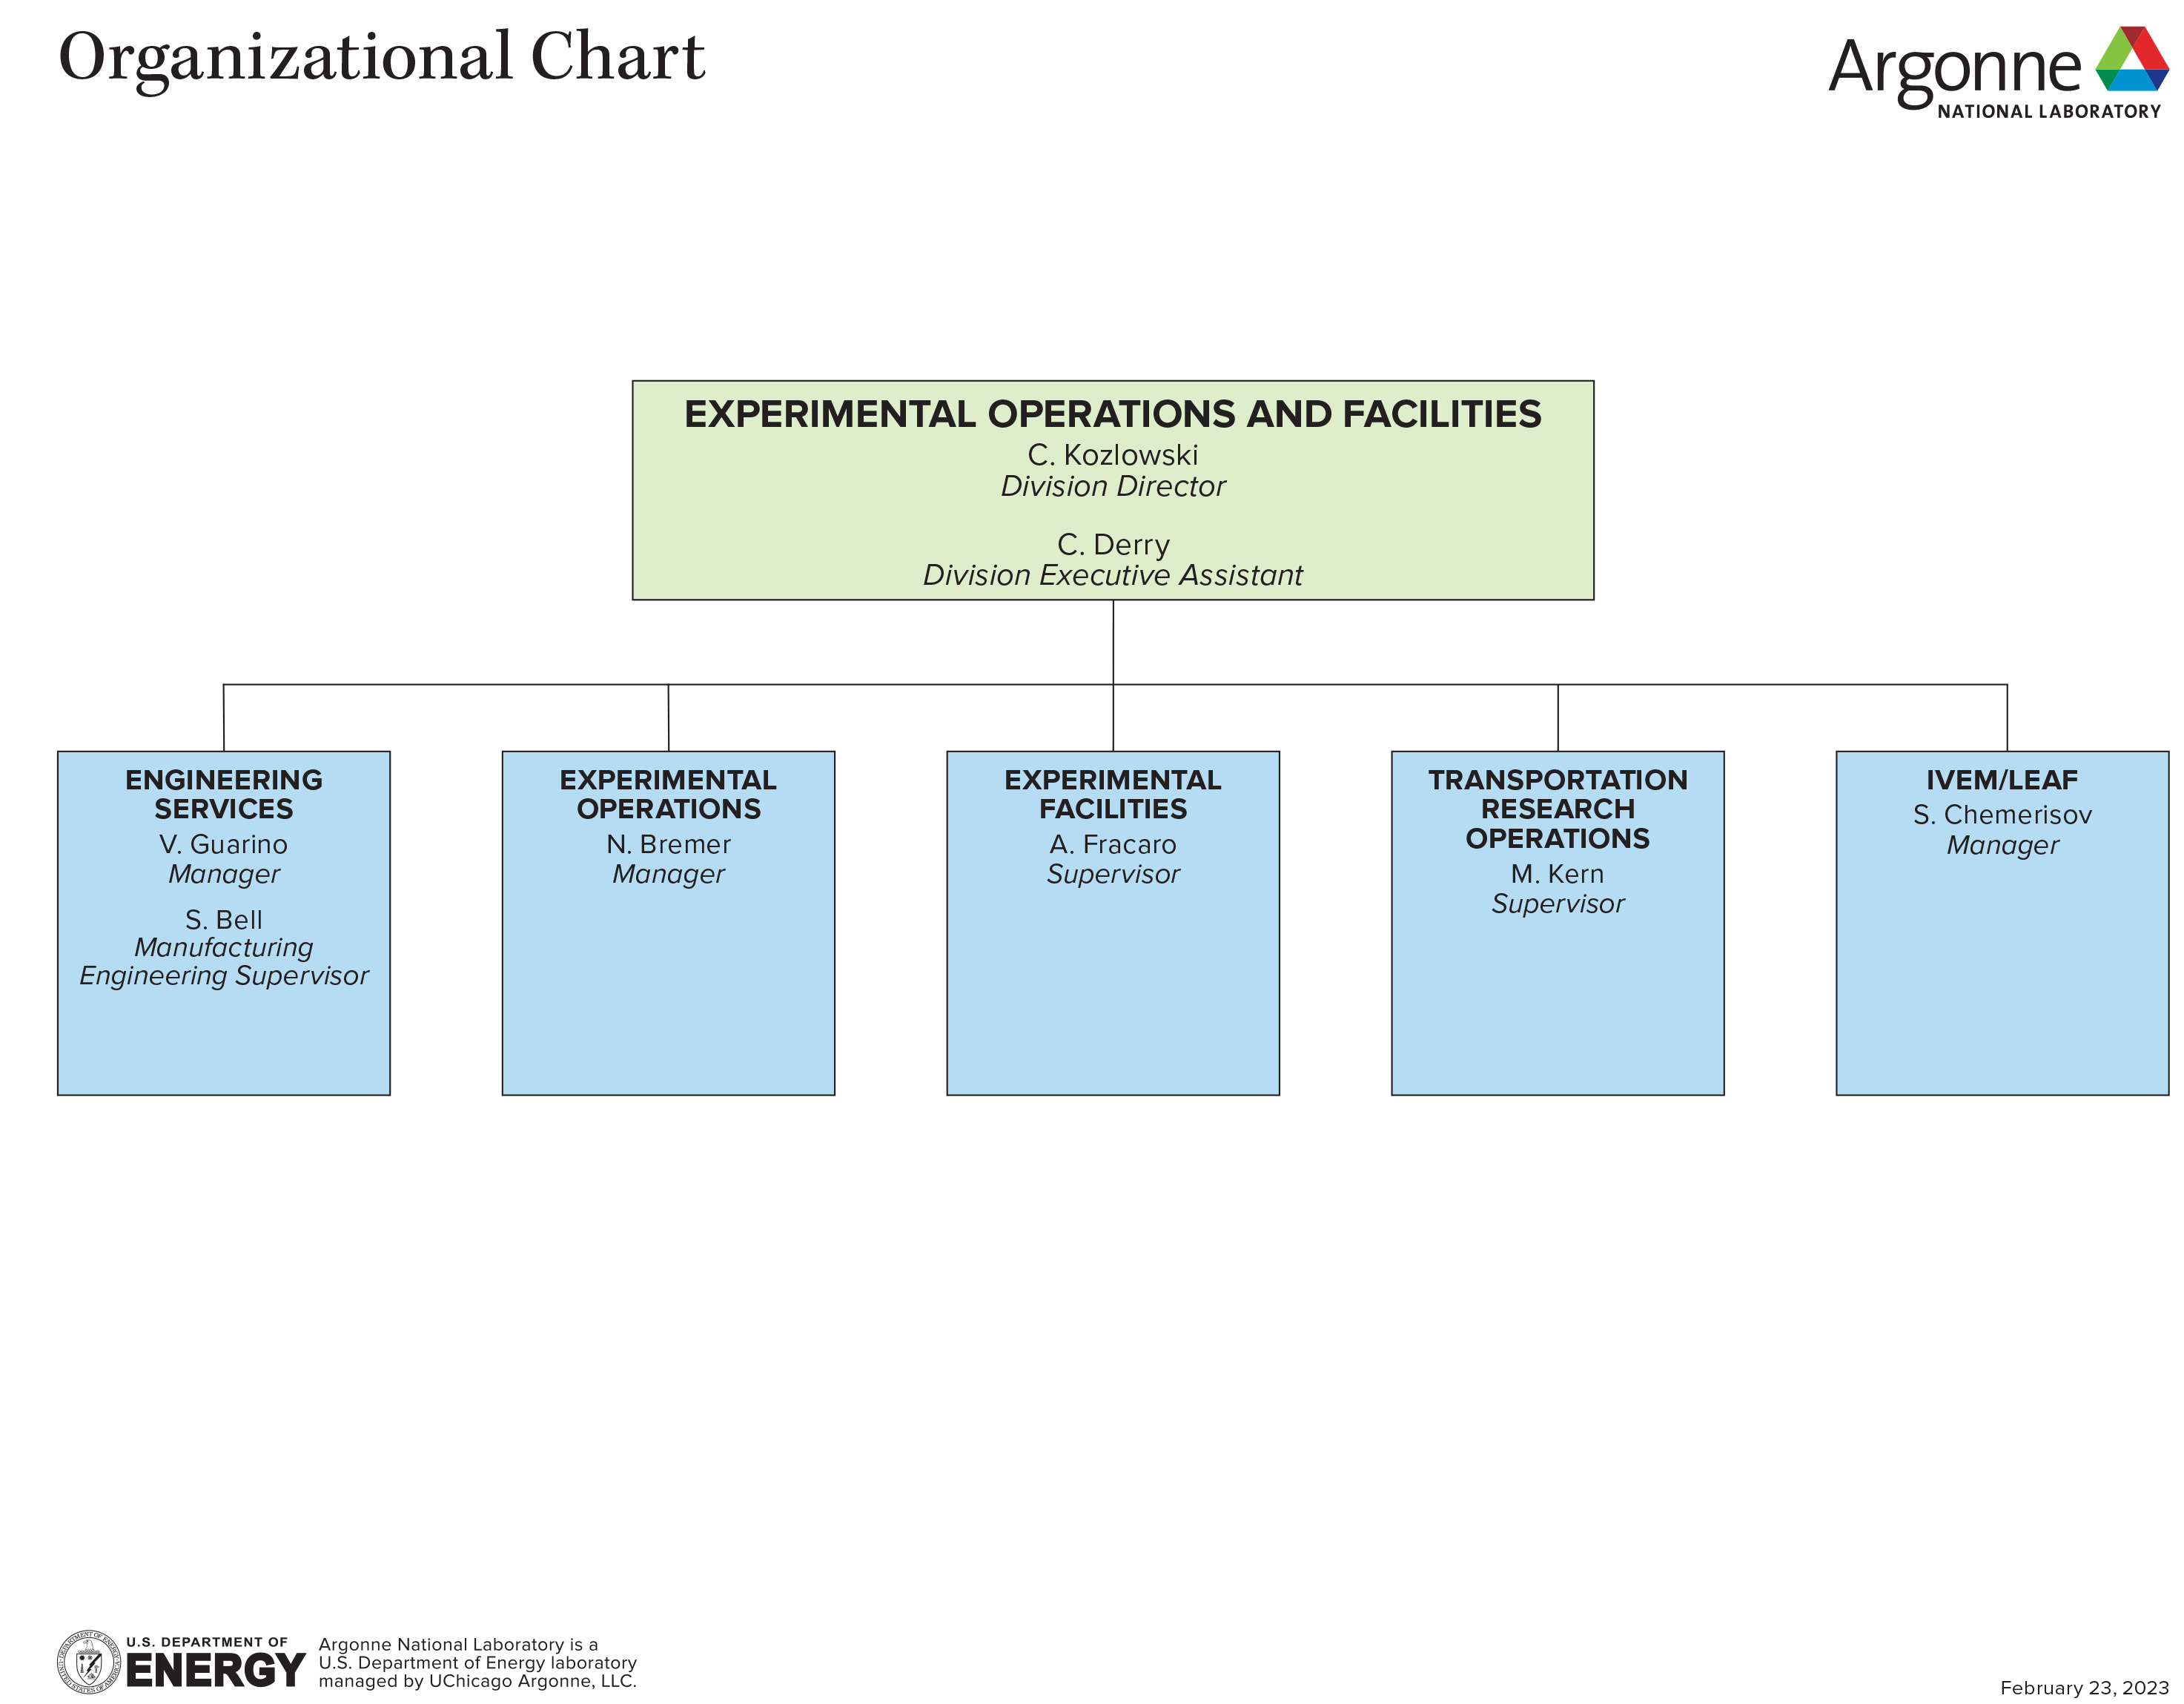 Organization chart of the Argonne Experimental Operations and Facilities division